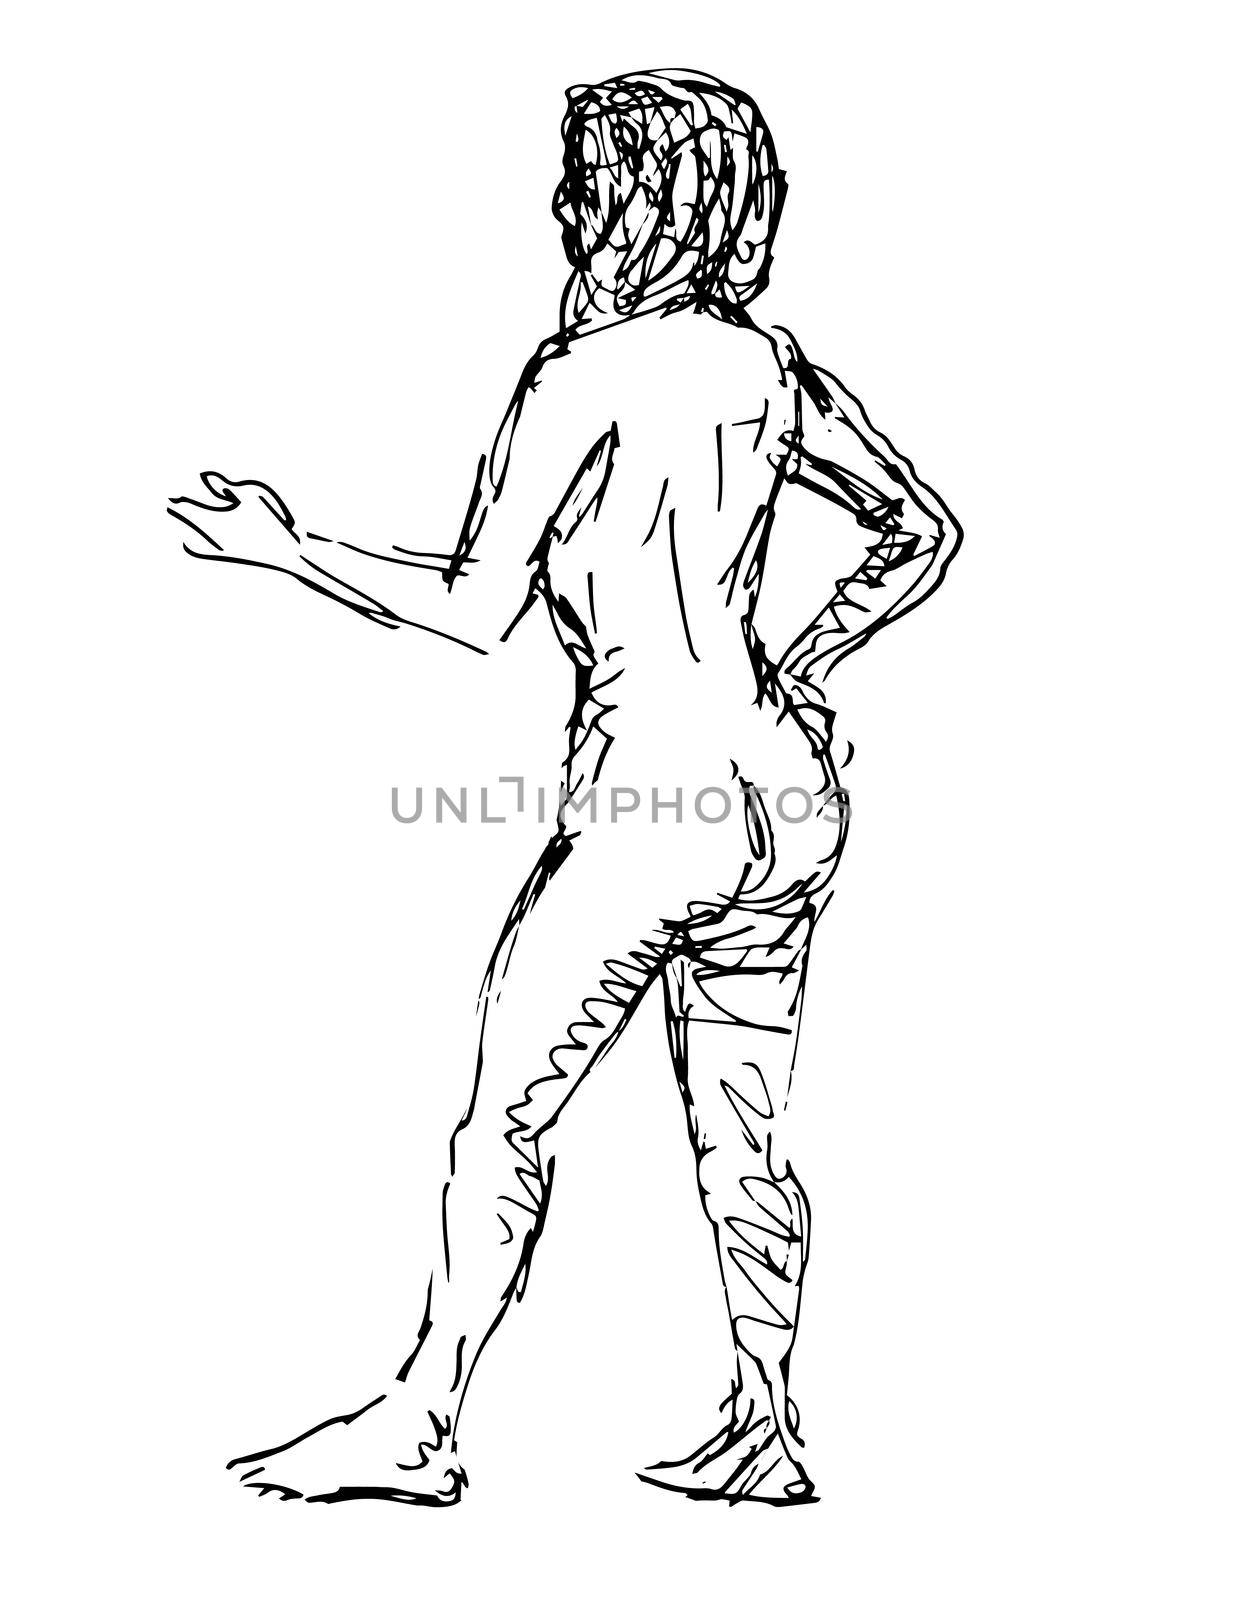 Nude Female Human Figure Standing With Hand on Hip Pointing Side View Doodle Art Line  by patrimonio